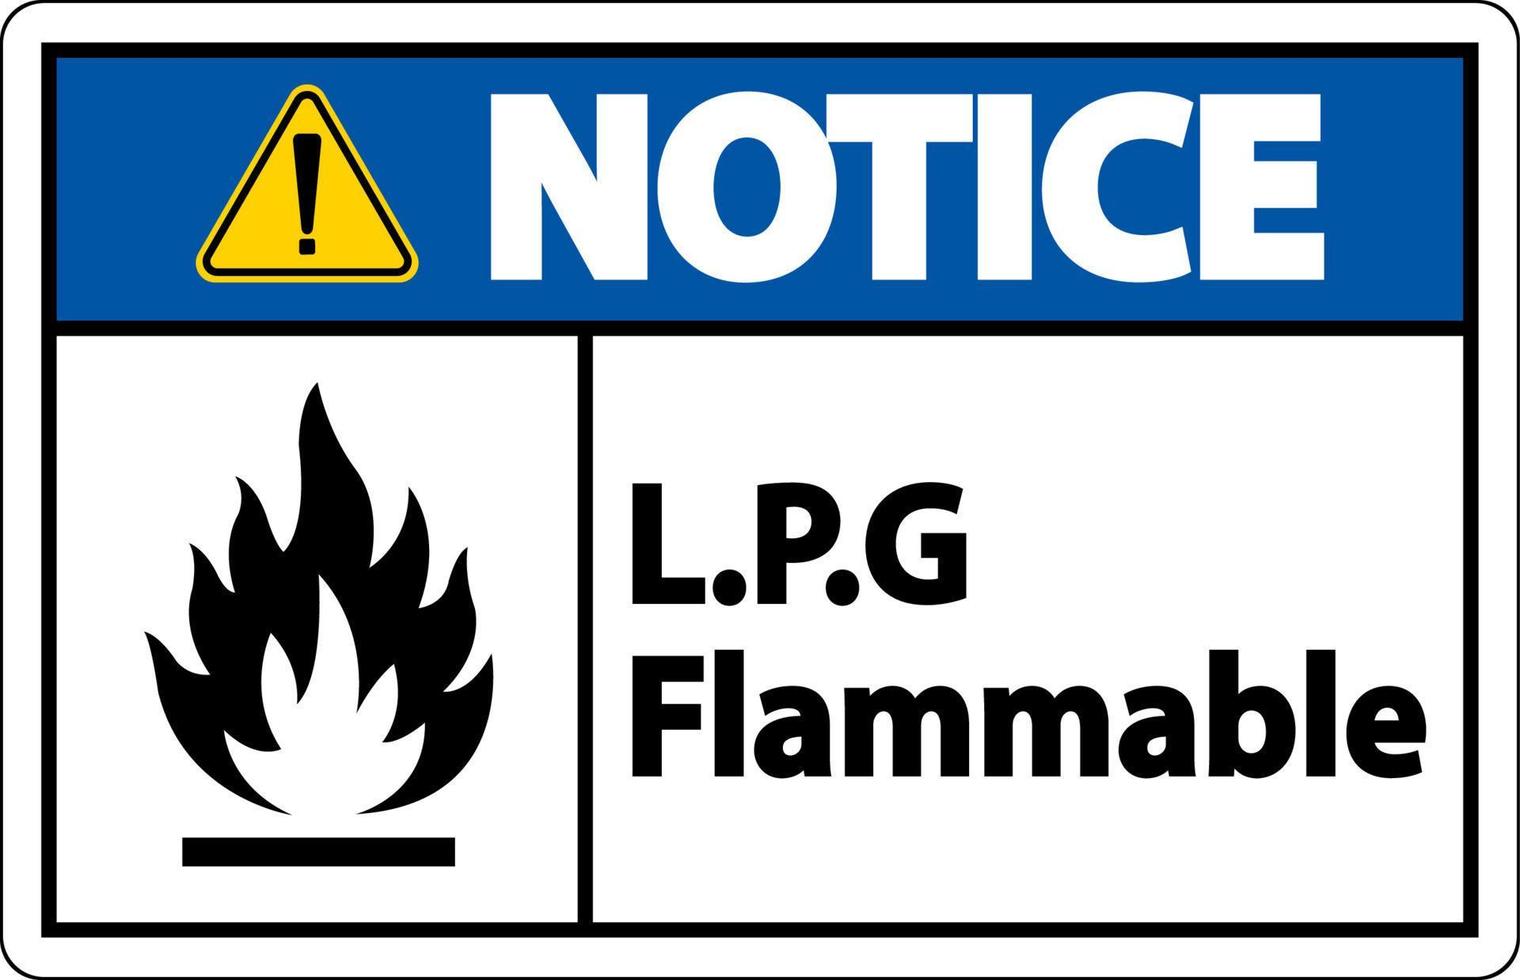 Notice L.P.G Flammable Symbol Sign On White Background vector